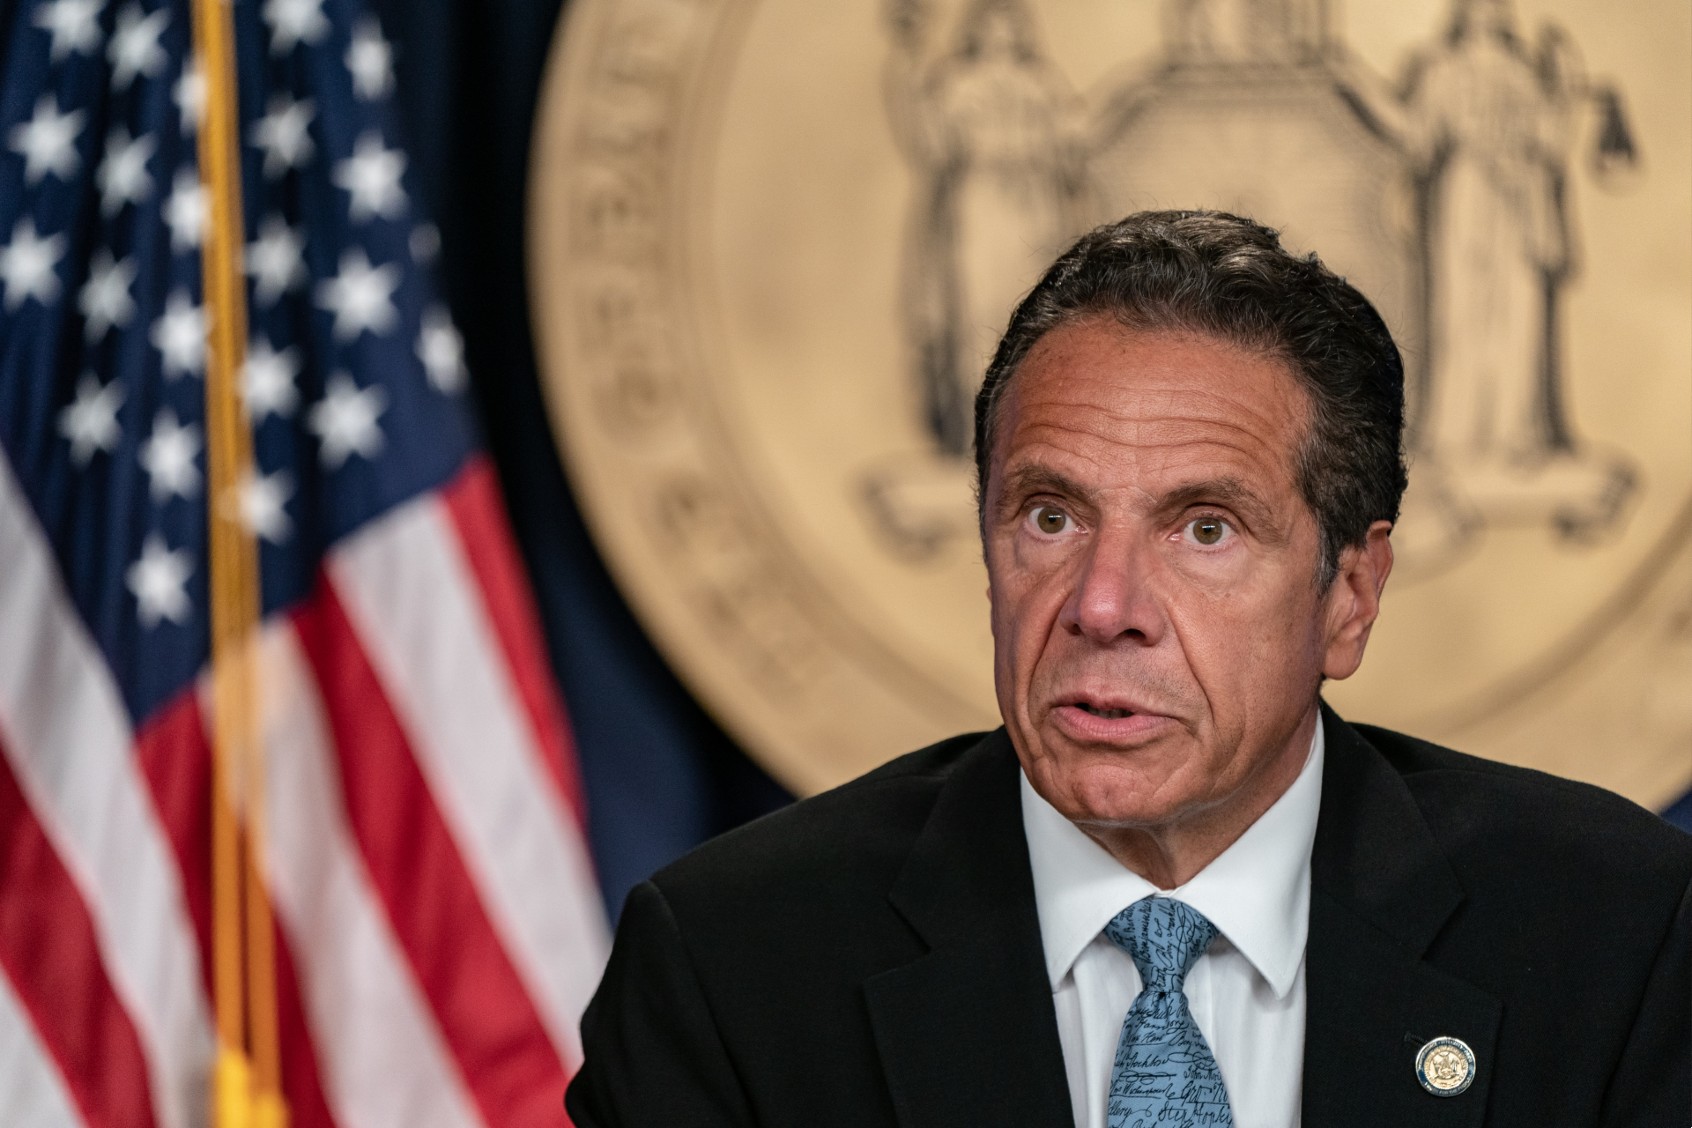 Andrew Cuomo created “sexually hostile work environment” according to DOJ settlement